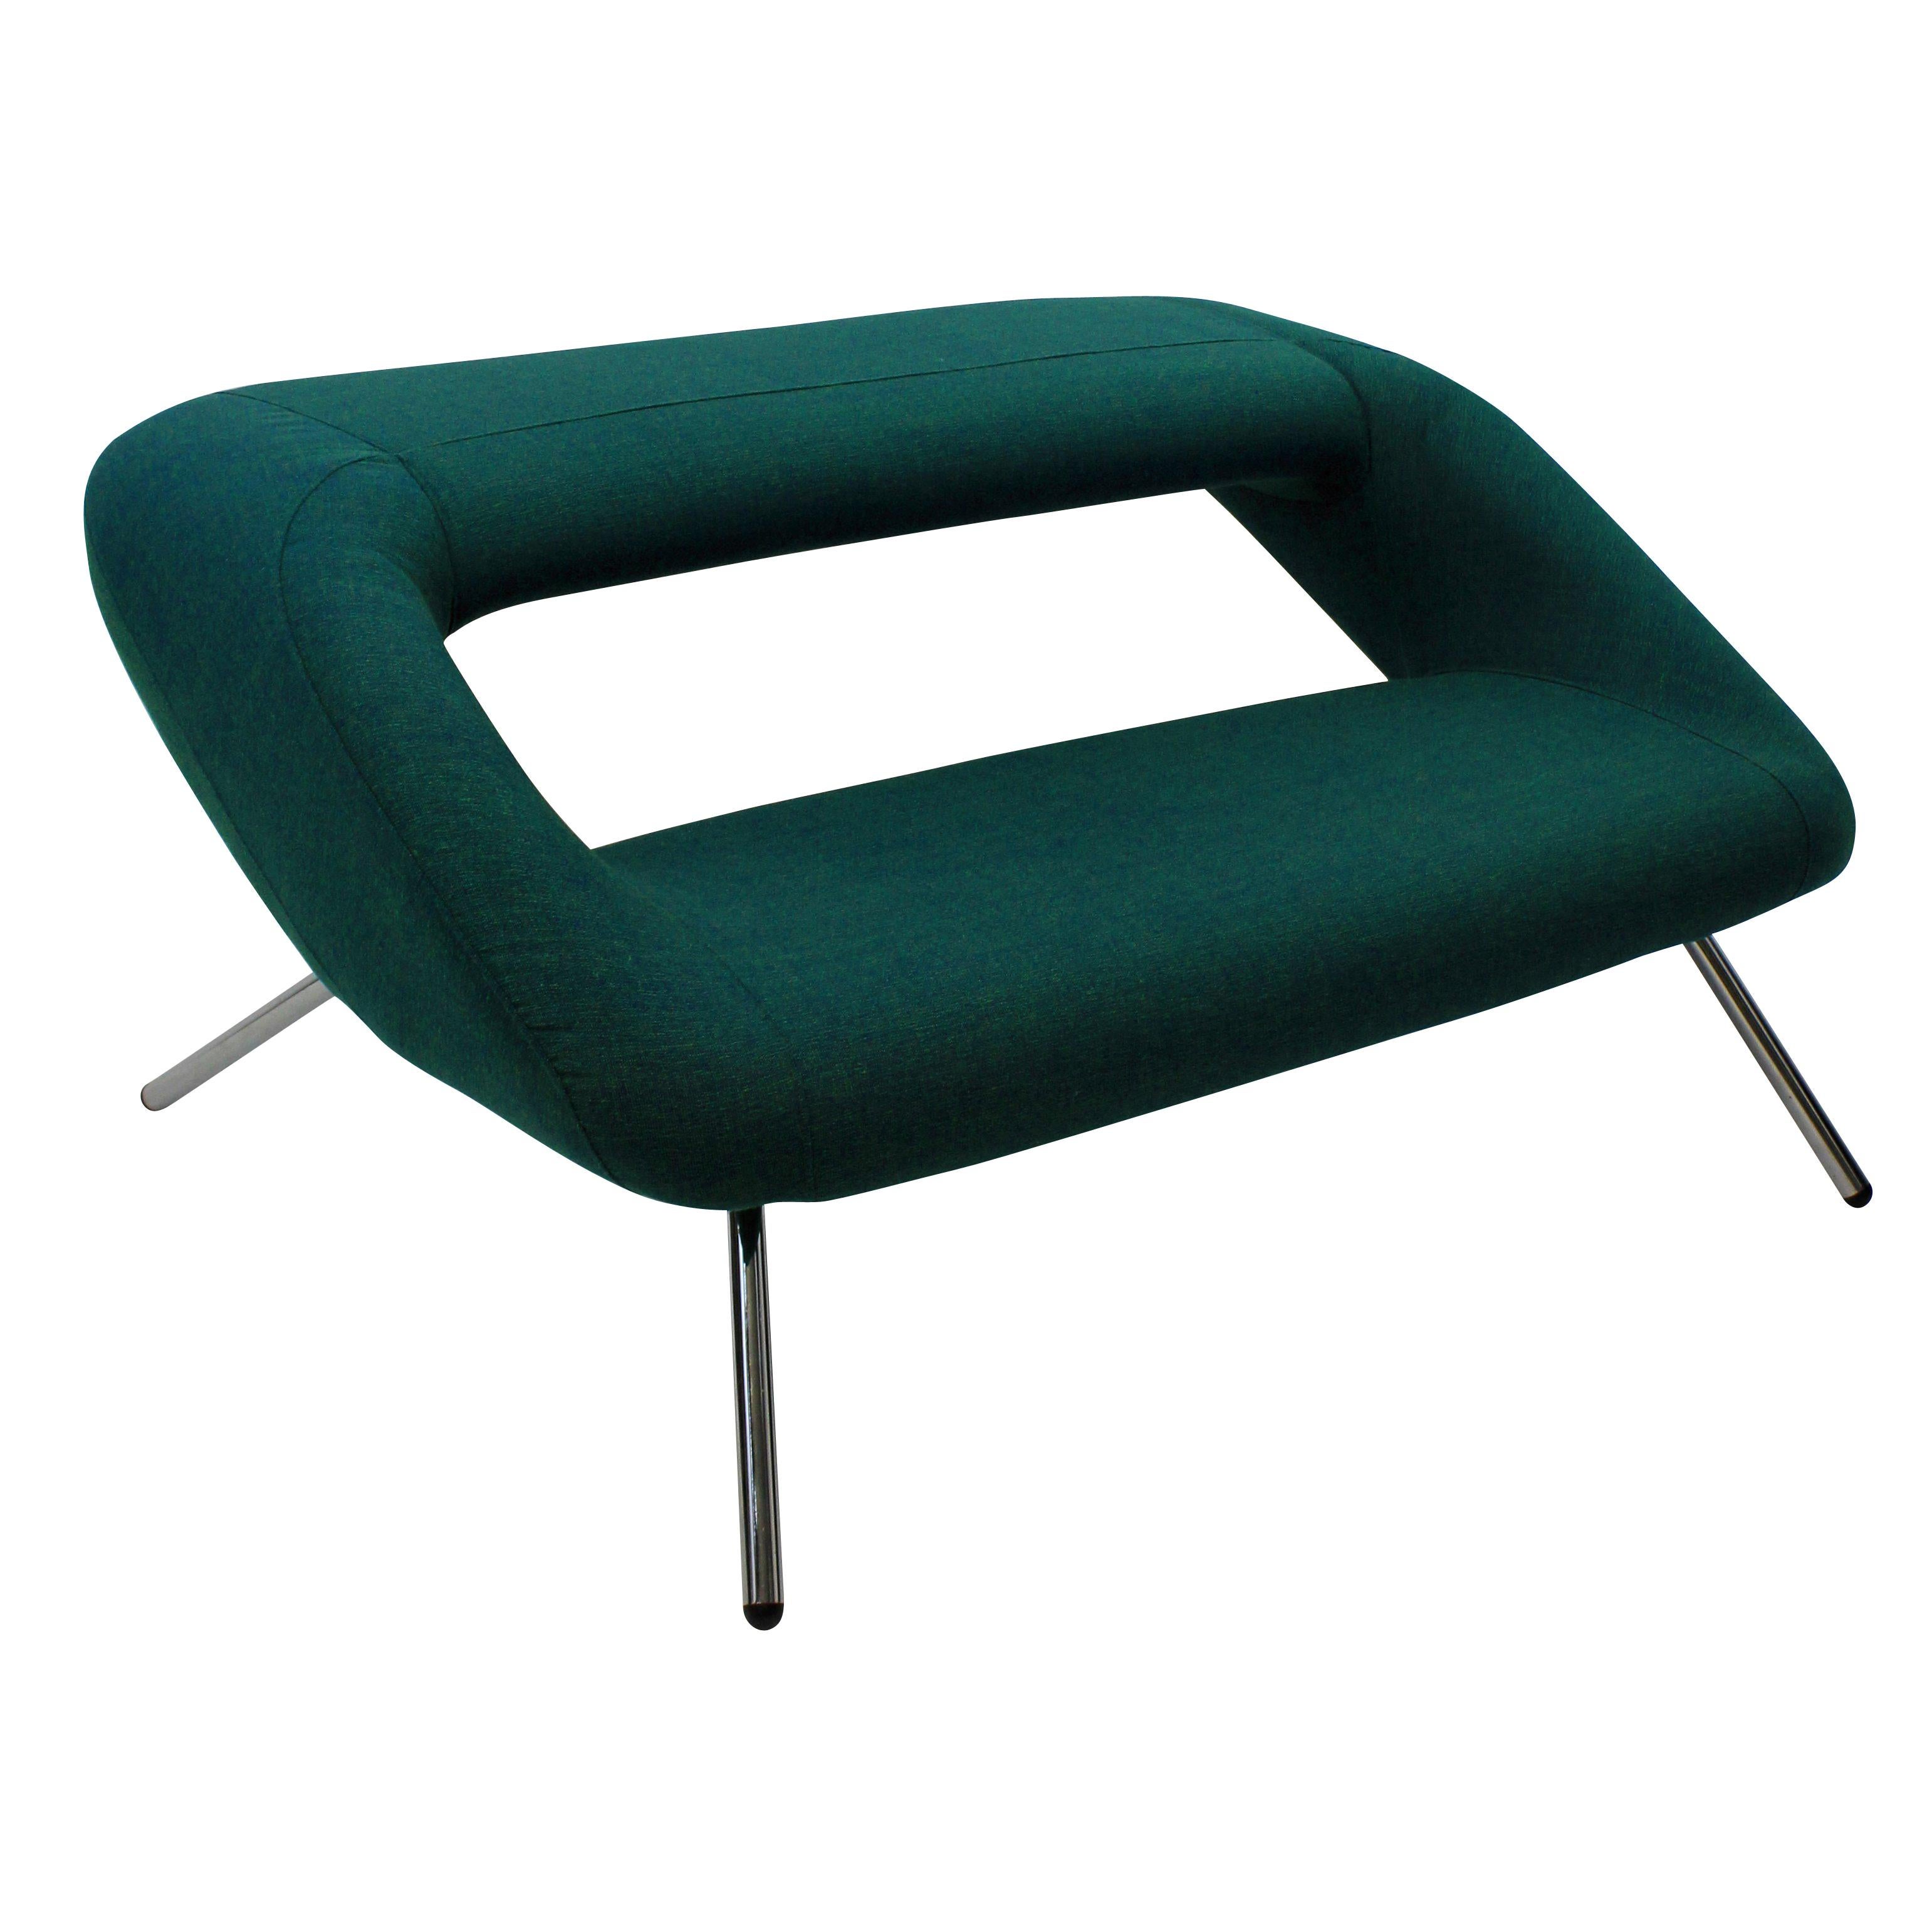 An unusual Italian modernist sofa. Of interesting design, newly upholstered in emerald bute and on chrome legs.
 